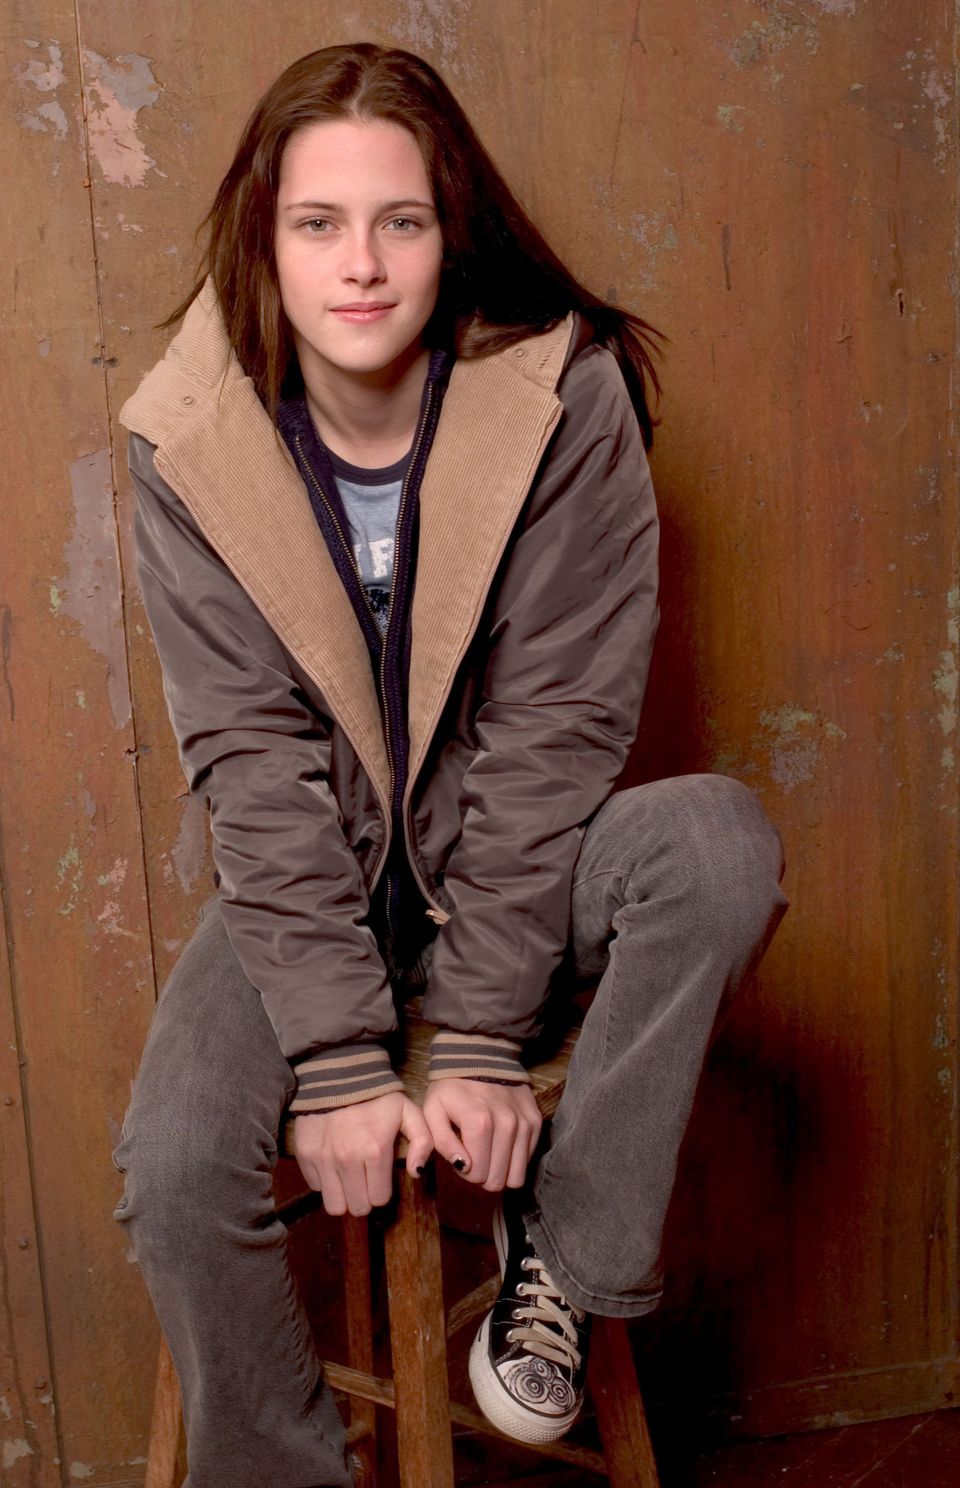 The Best Photos Of Kristen Stewart's Style Over The Years | HuffPost Life